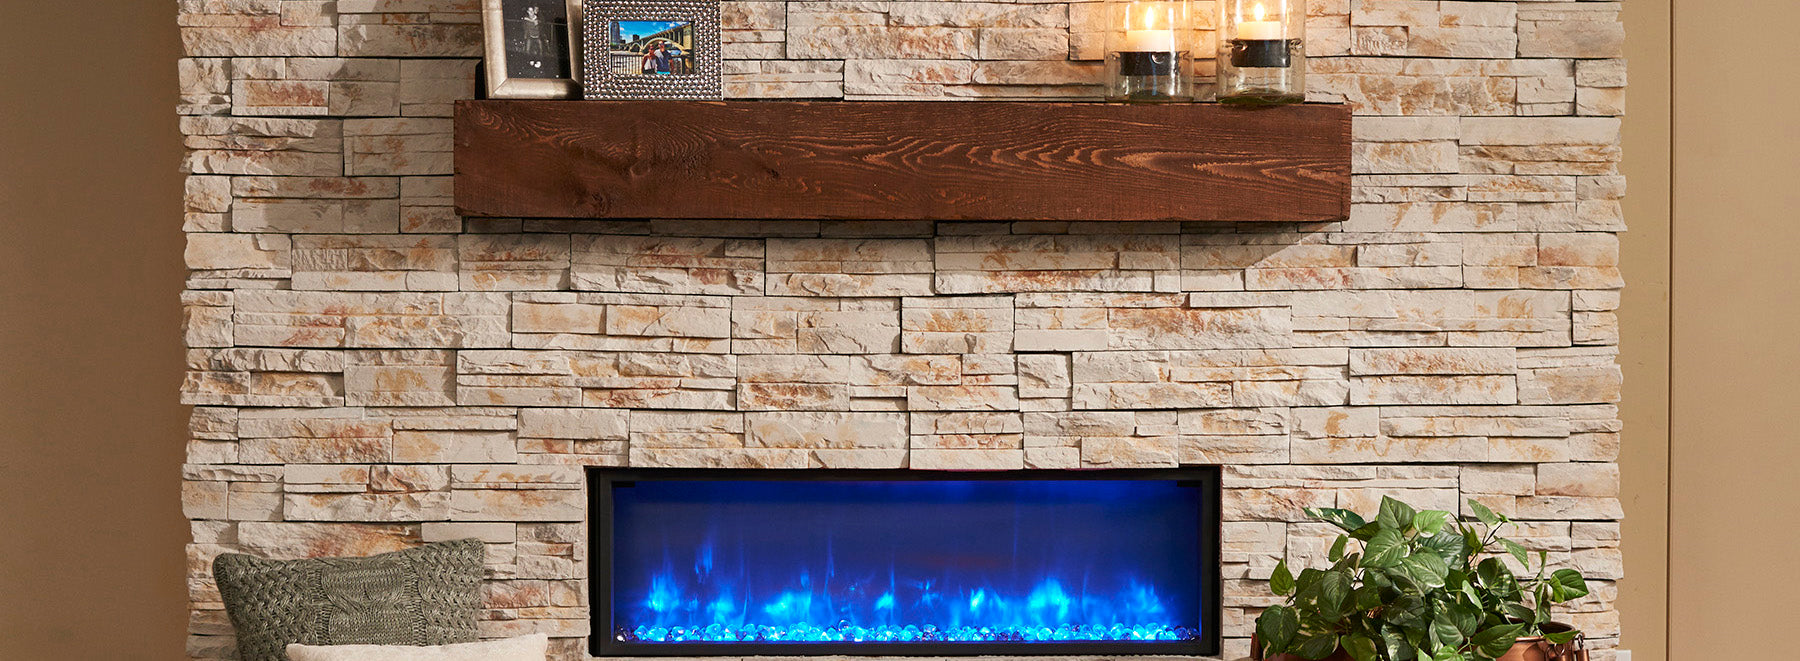 Outdoor GreatRoom Gallery Linear Supercast Wood Mantel Gallery Linear Built-In Electric Fireplace GBL-44